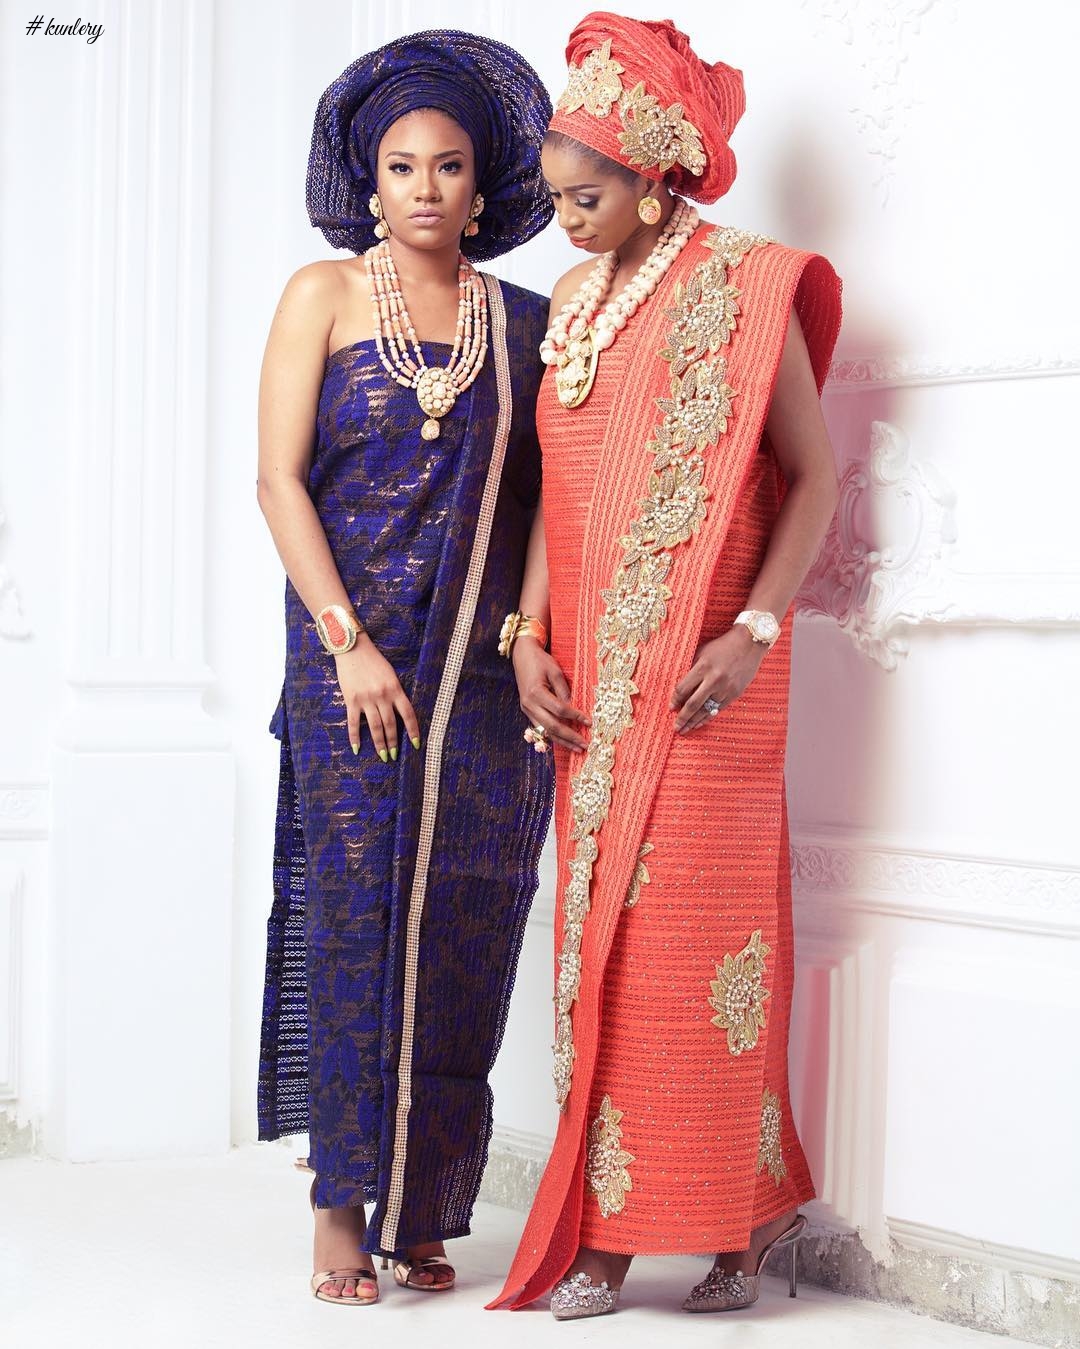 ANNA BANNER AND SHADE OKOYA MODEL AS MOTHER AND DAUGHTER FOR ADEJOKE GELE